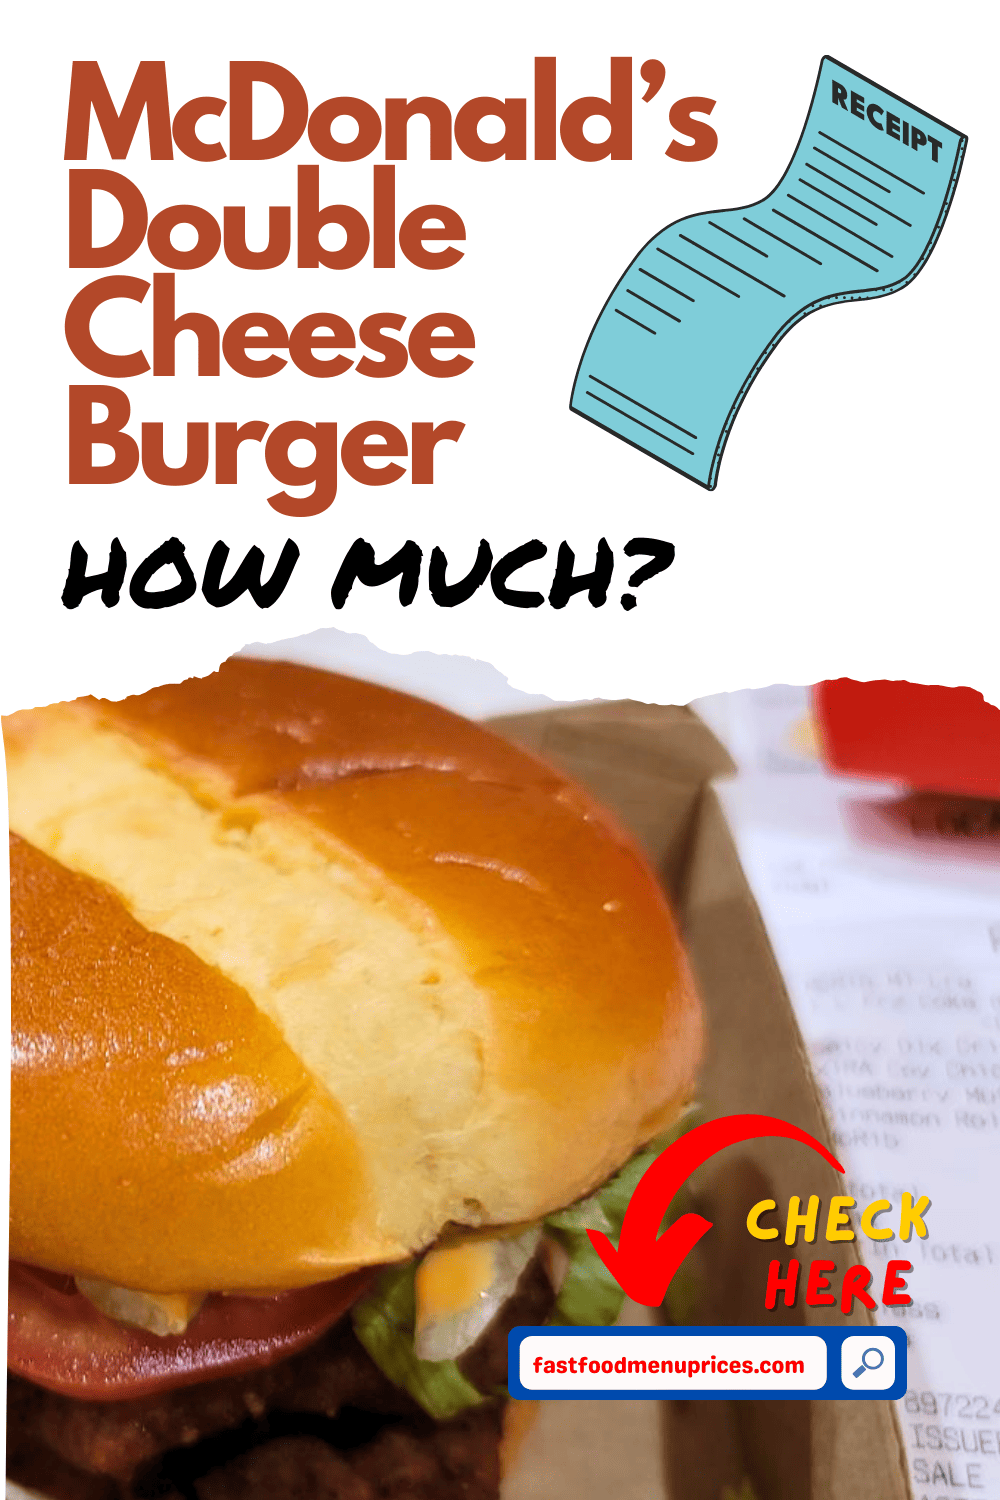 How much does McDonald's double cheeseburger cost?